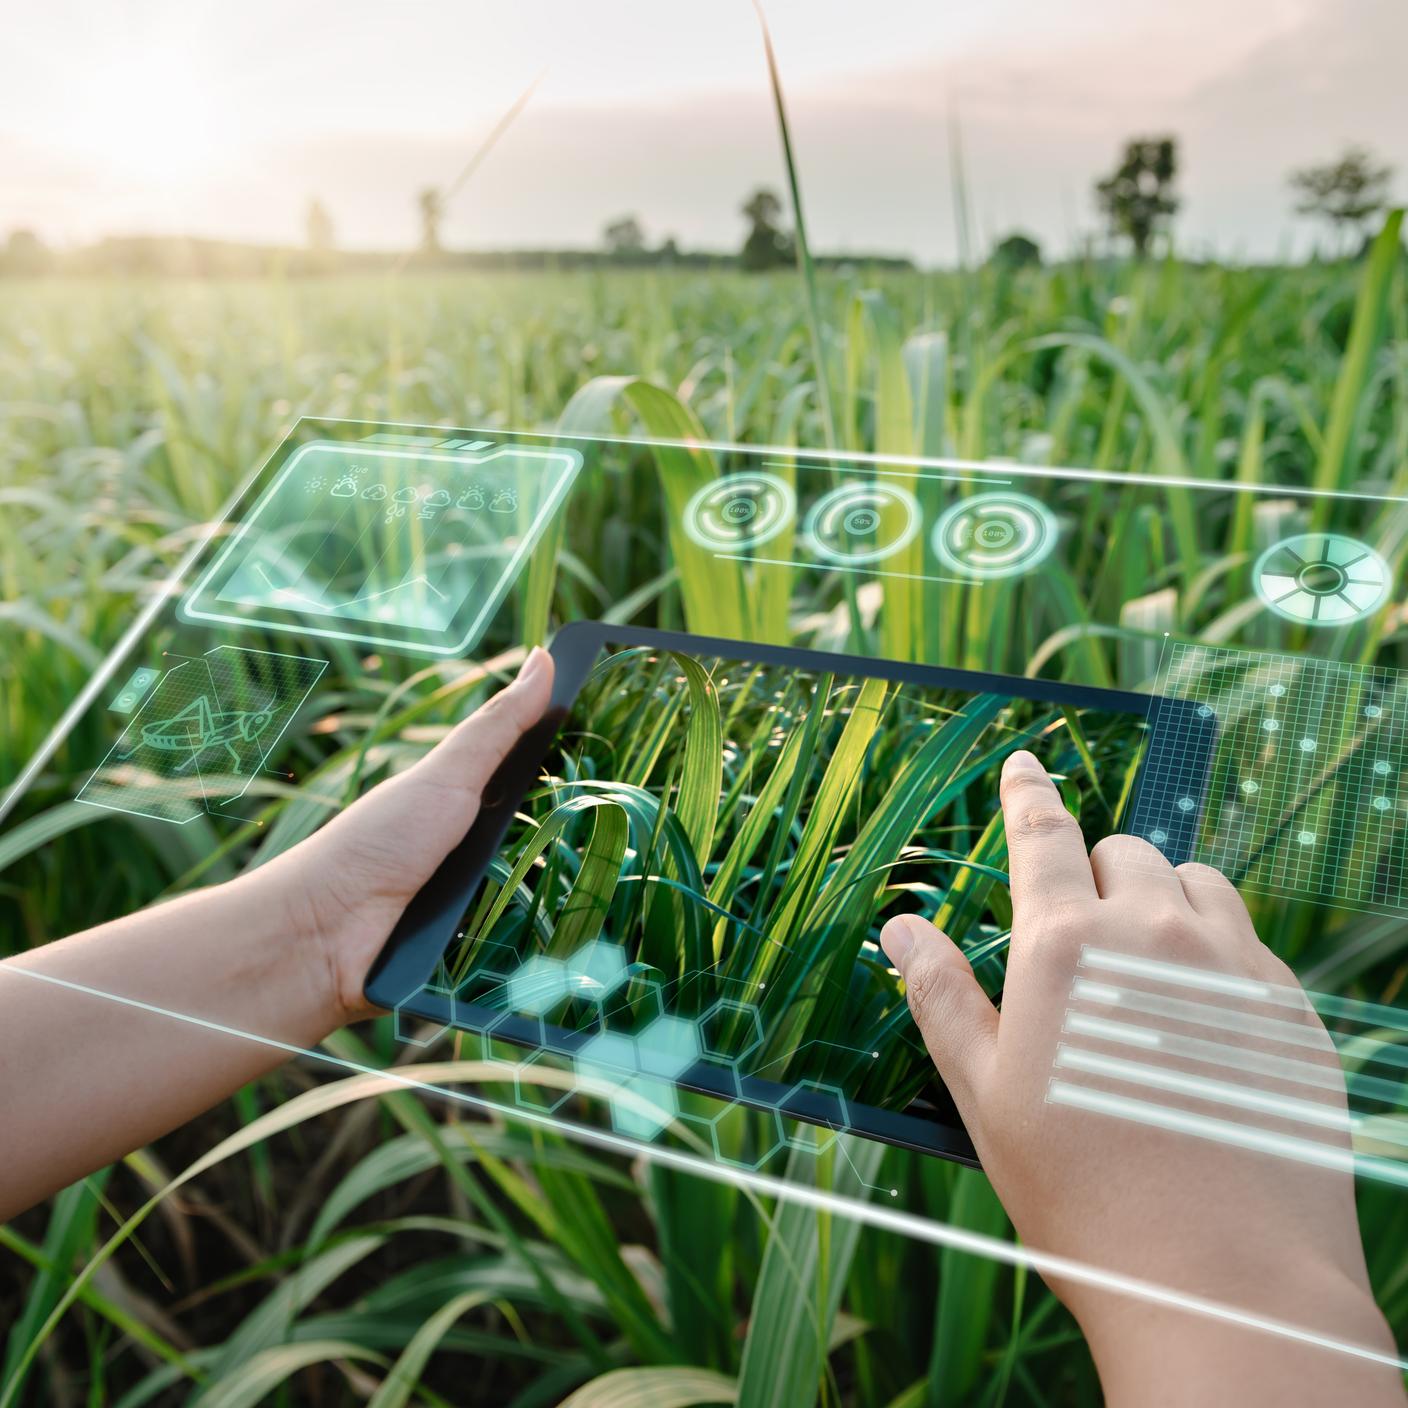 Shaping Trust in AI - Female Farm Worker Using Digital Tablet With Virtual Reality Artificial Intelligence (AI) for Analyzing Plant Disease in Sugarcane Agriculture Fields